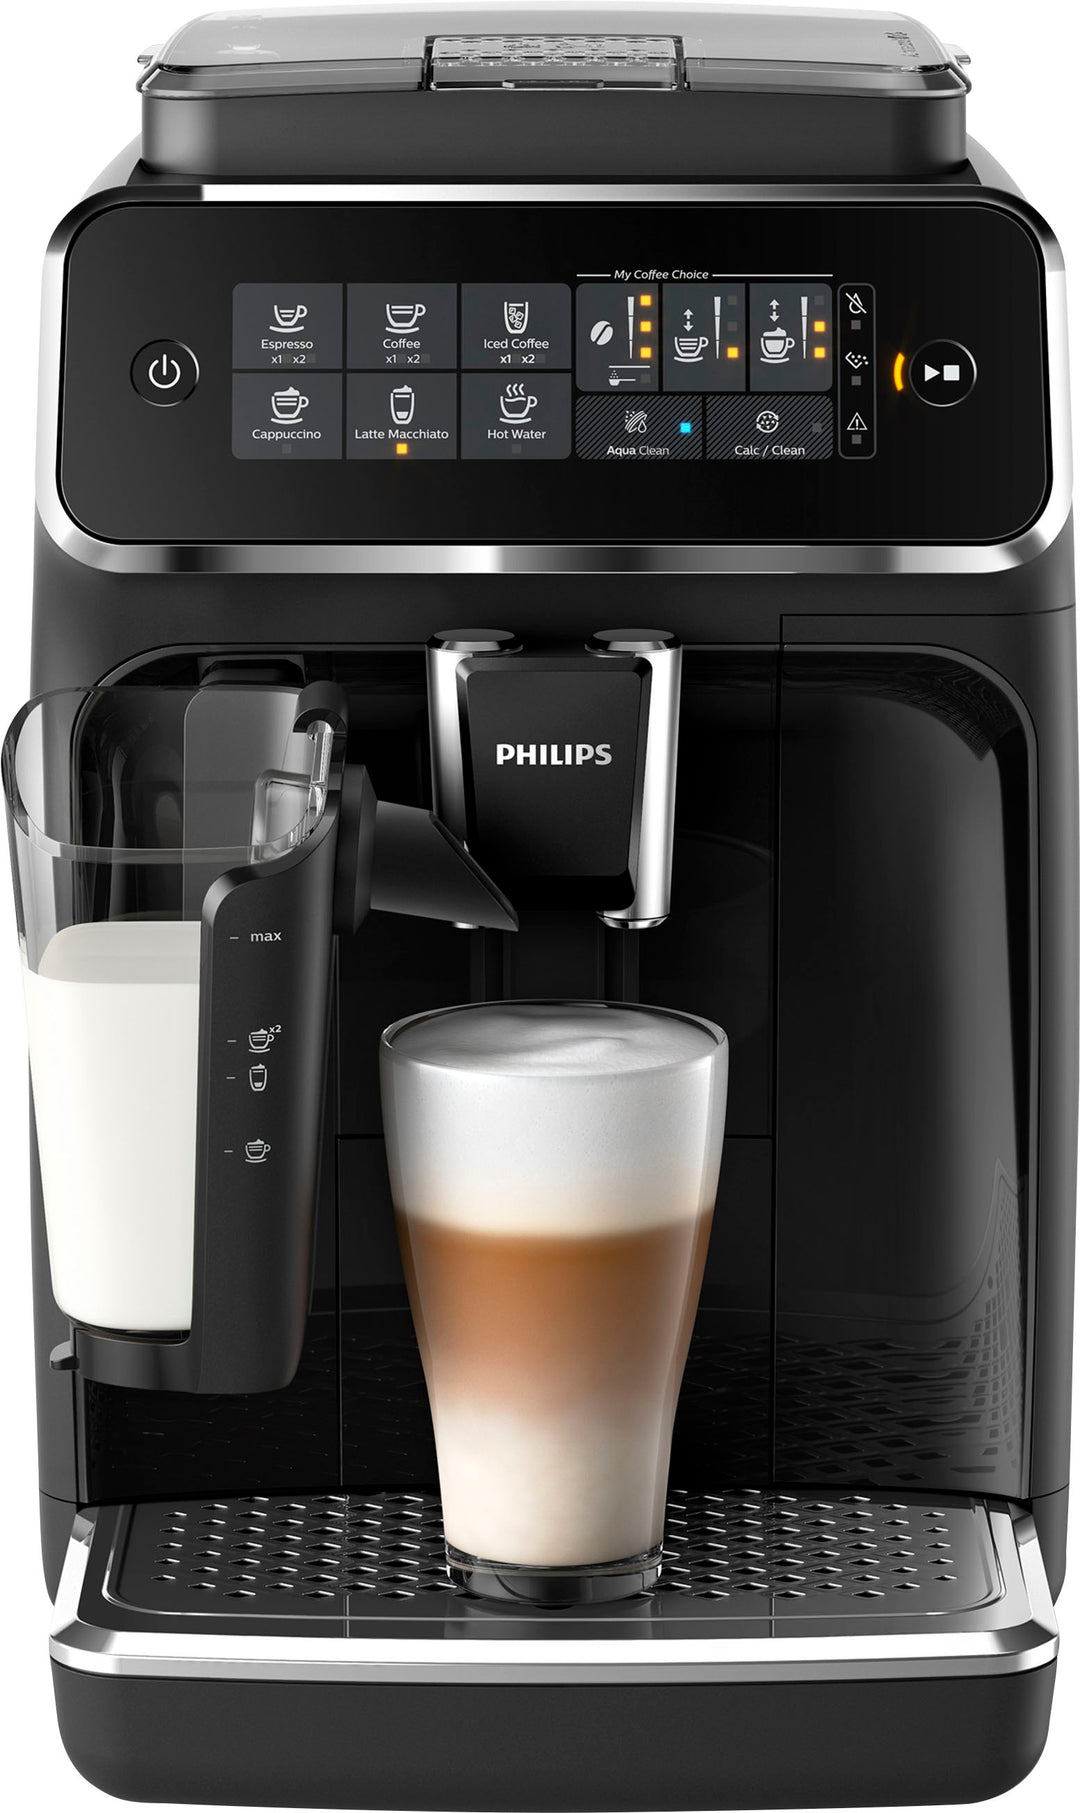 Philips 3200 Series Fully Automatic Espresso Machine with LatteGo Milk Frother and Iced Coffee, 5 Coffee Varieties - Black_2